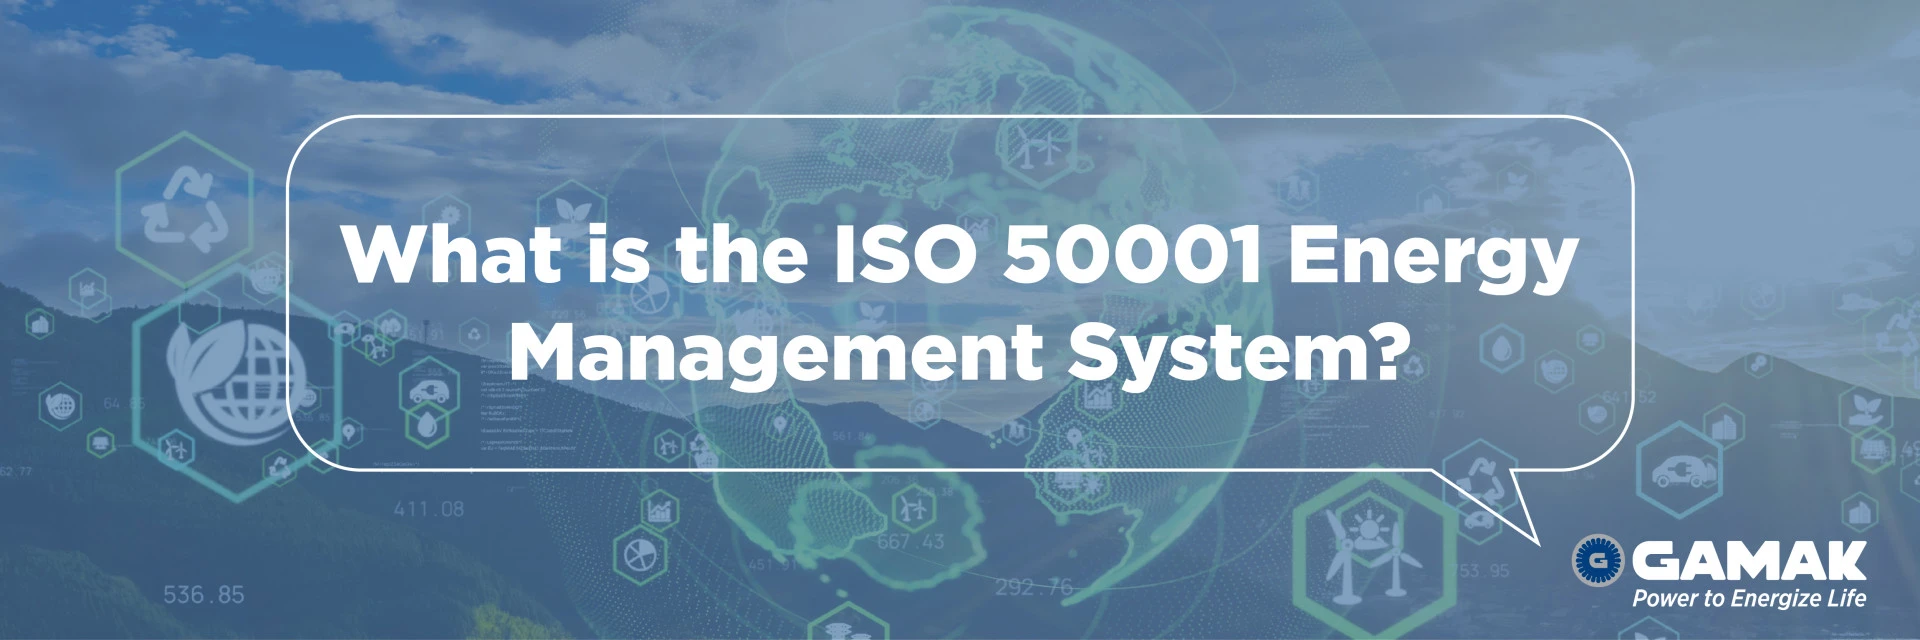 What is the ISO 50001 Energy Management System? Why is it Important for Businesses?